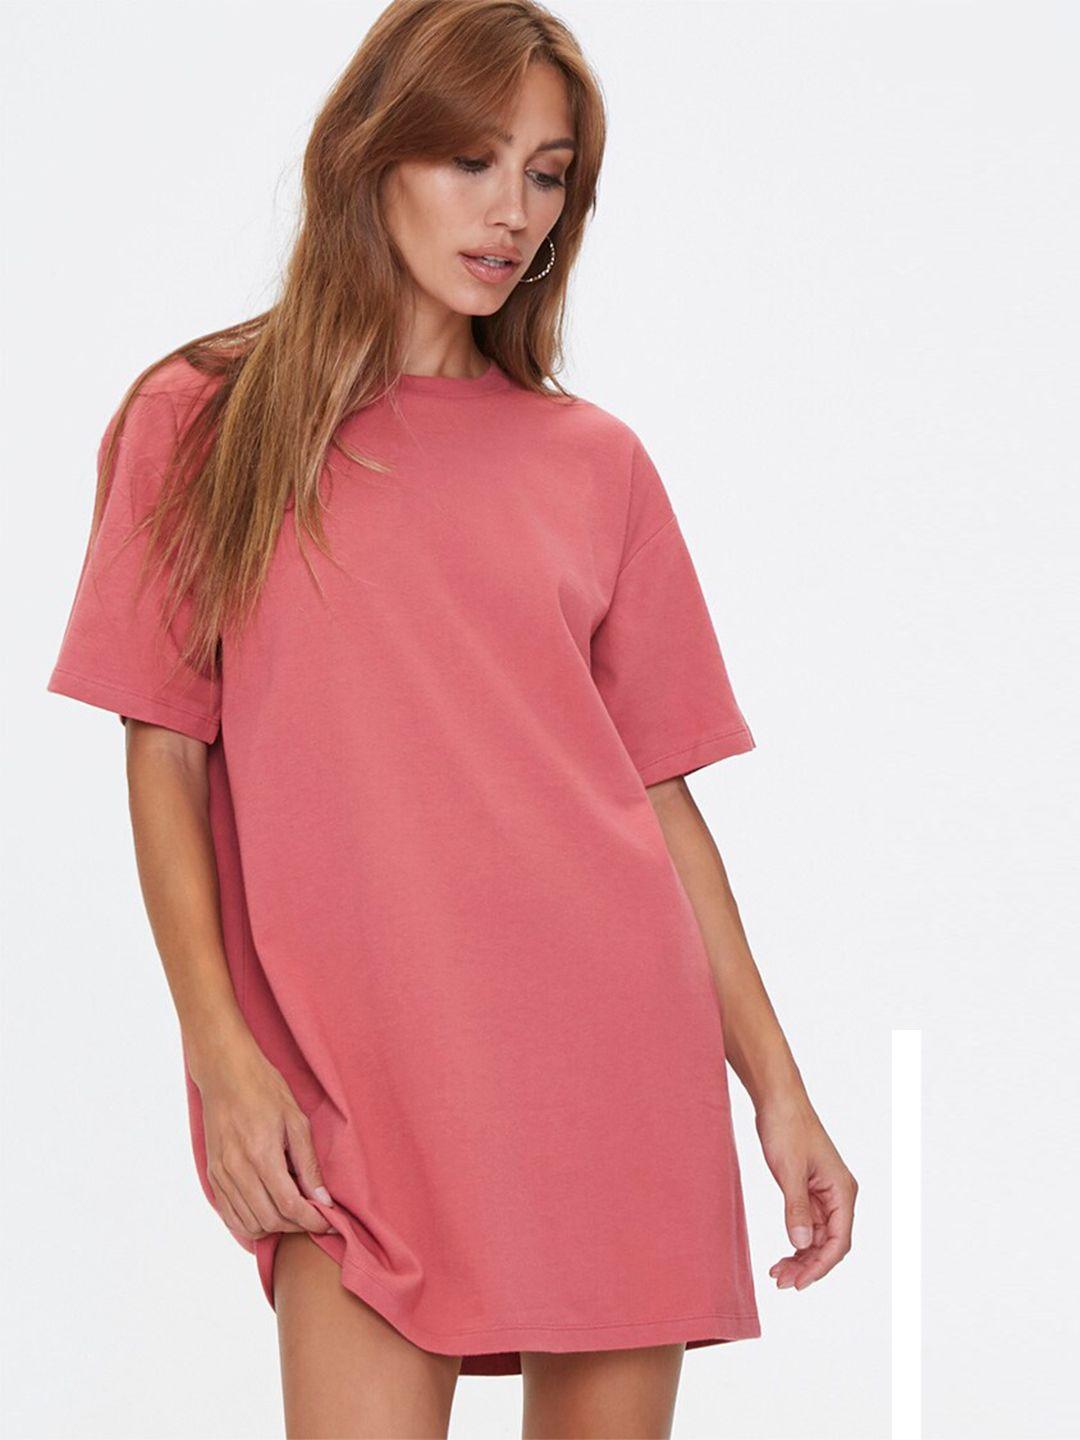 forever-21-women-pink-solid-t-shirt-dress